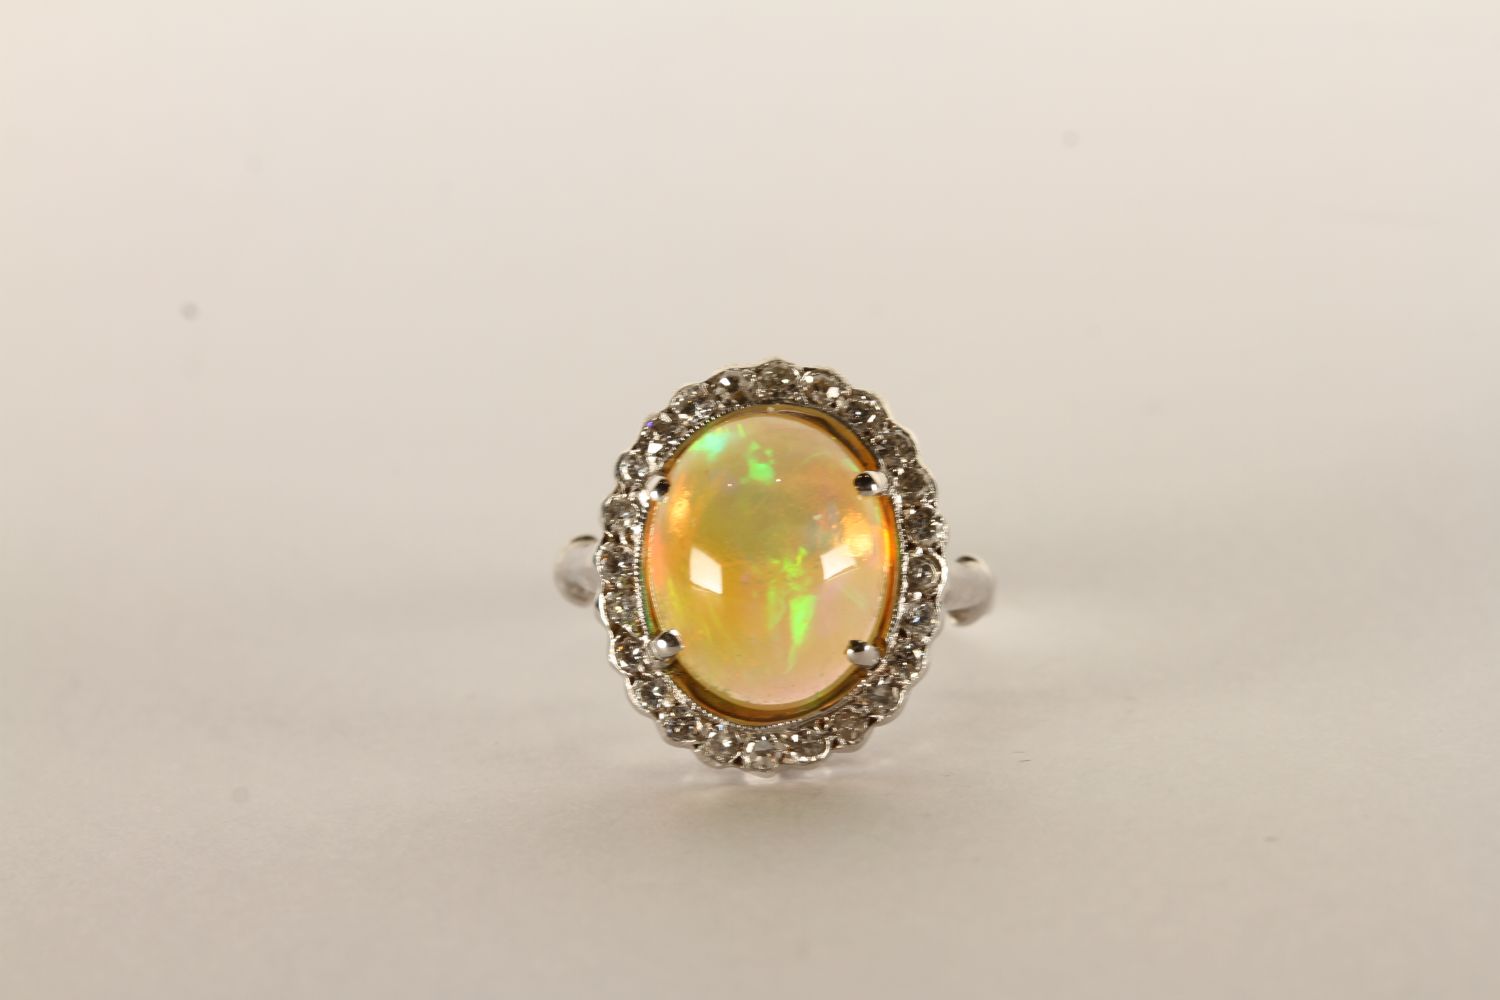 Opal and Diamond Cluster Ring, Cabochon Opal, 12.5x10mm, diamond surround, in 18ct white gold